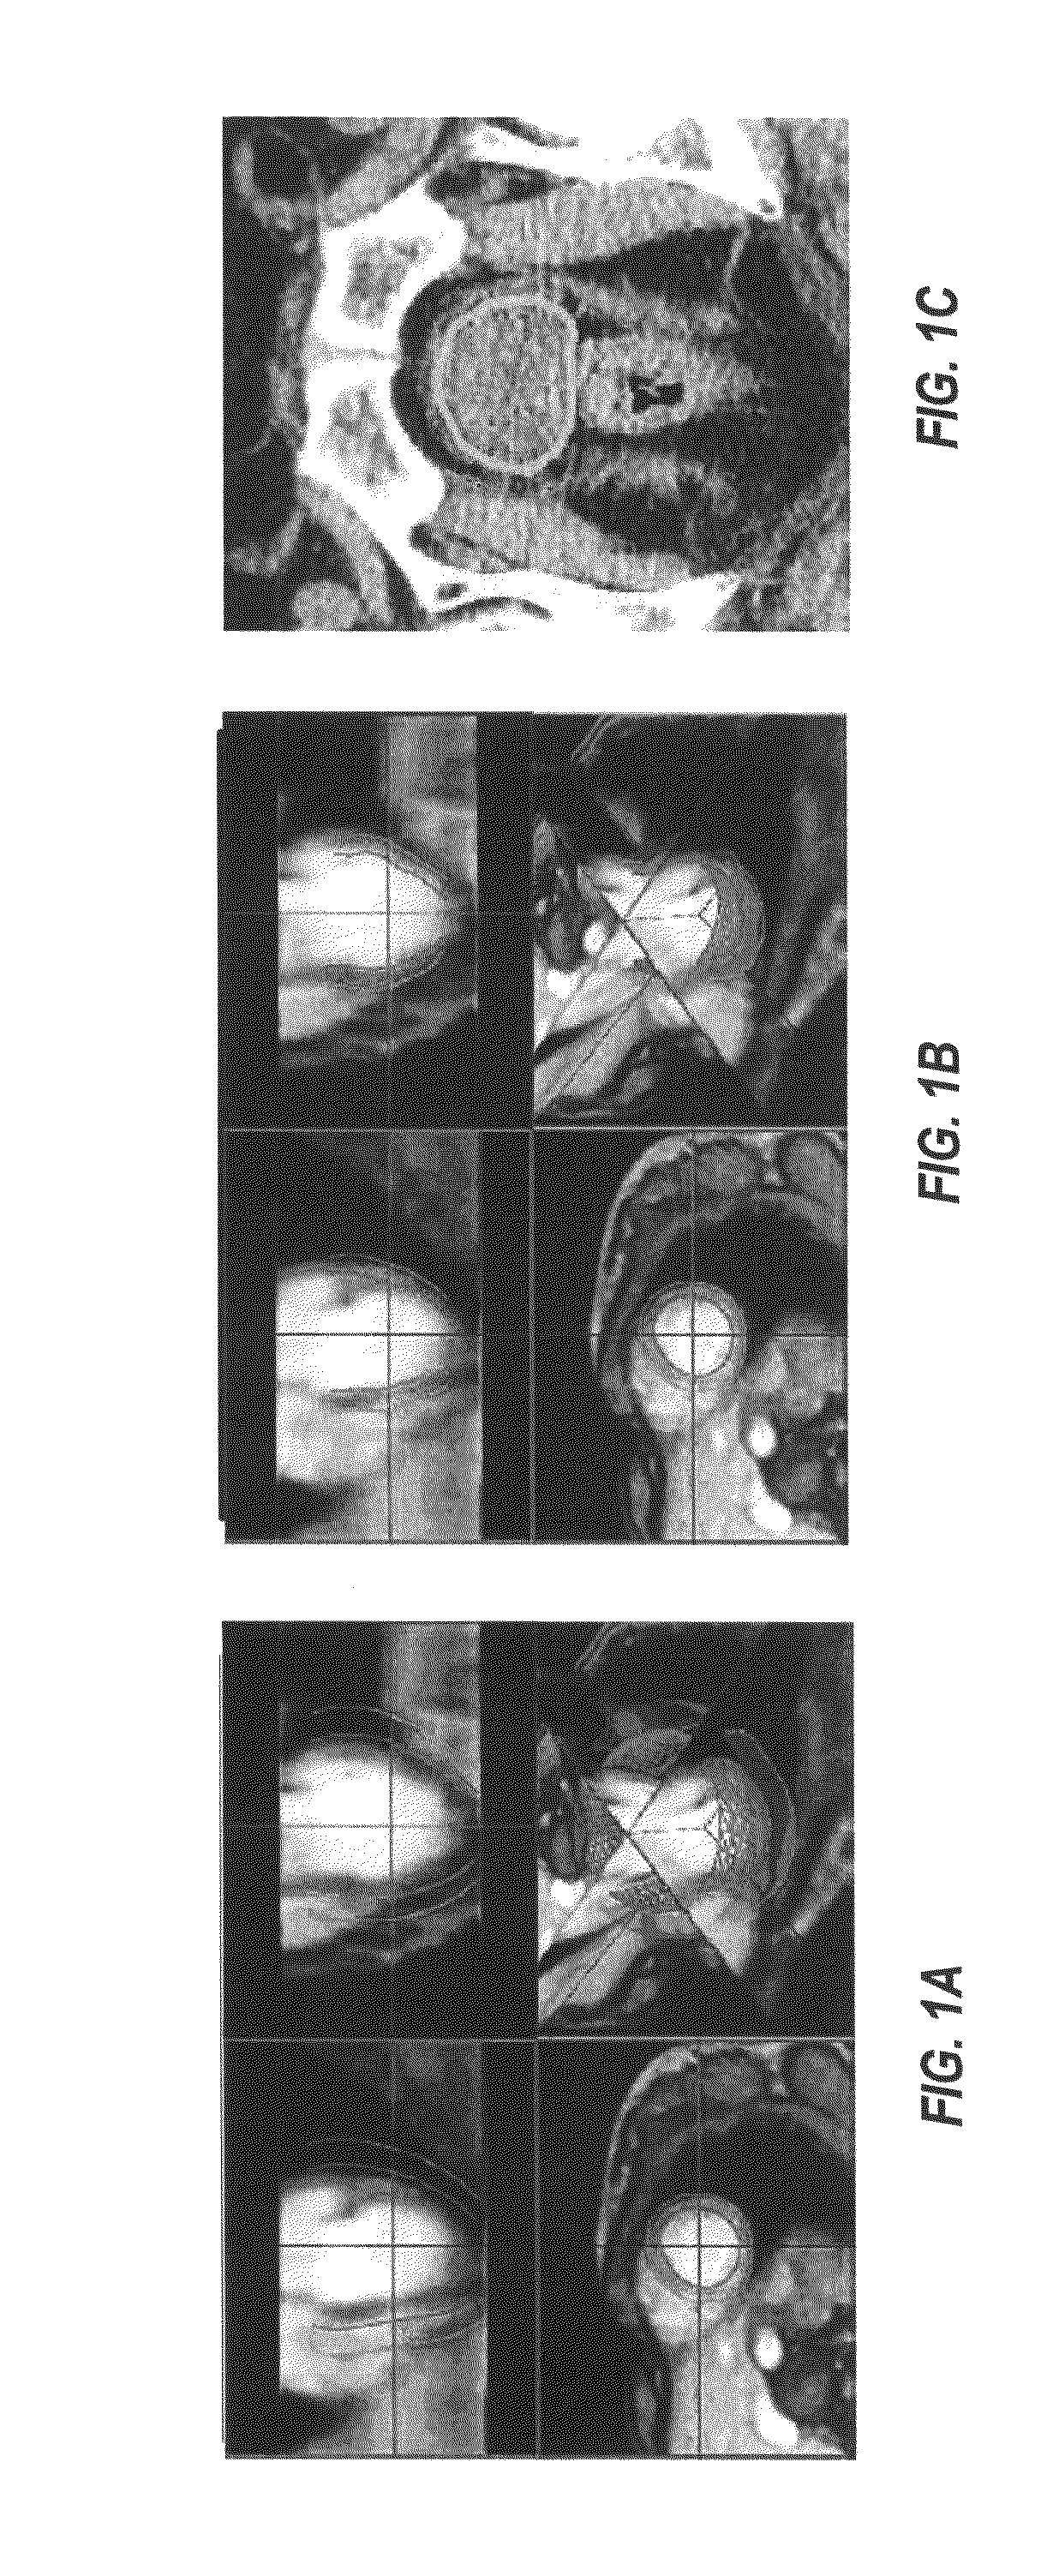 System and methods for multi-object multi-surface segmentation